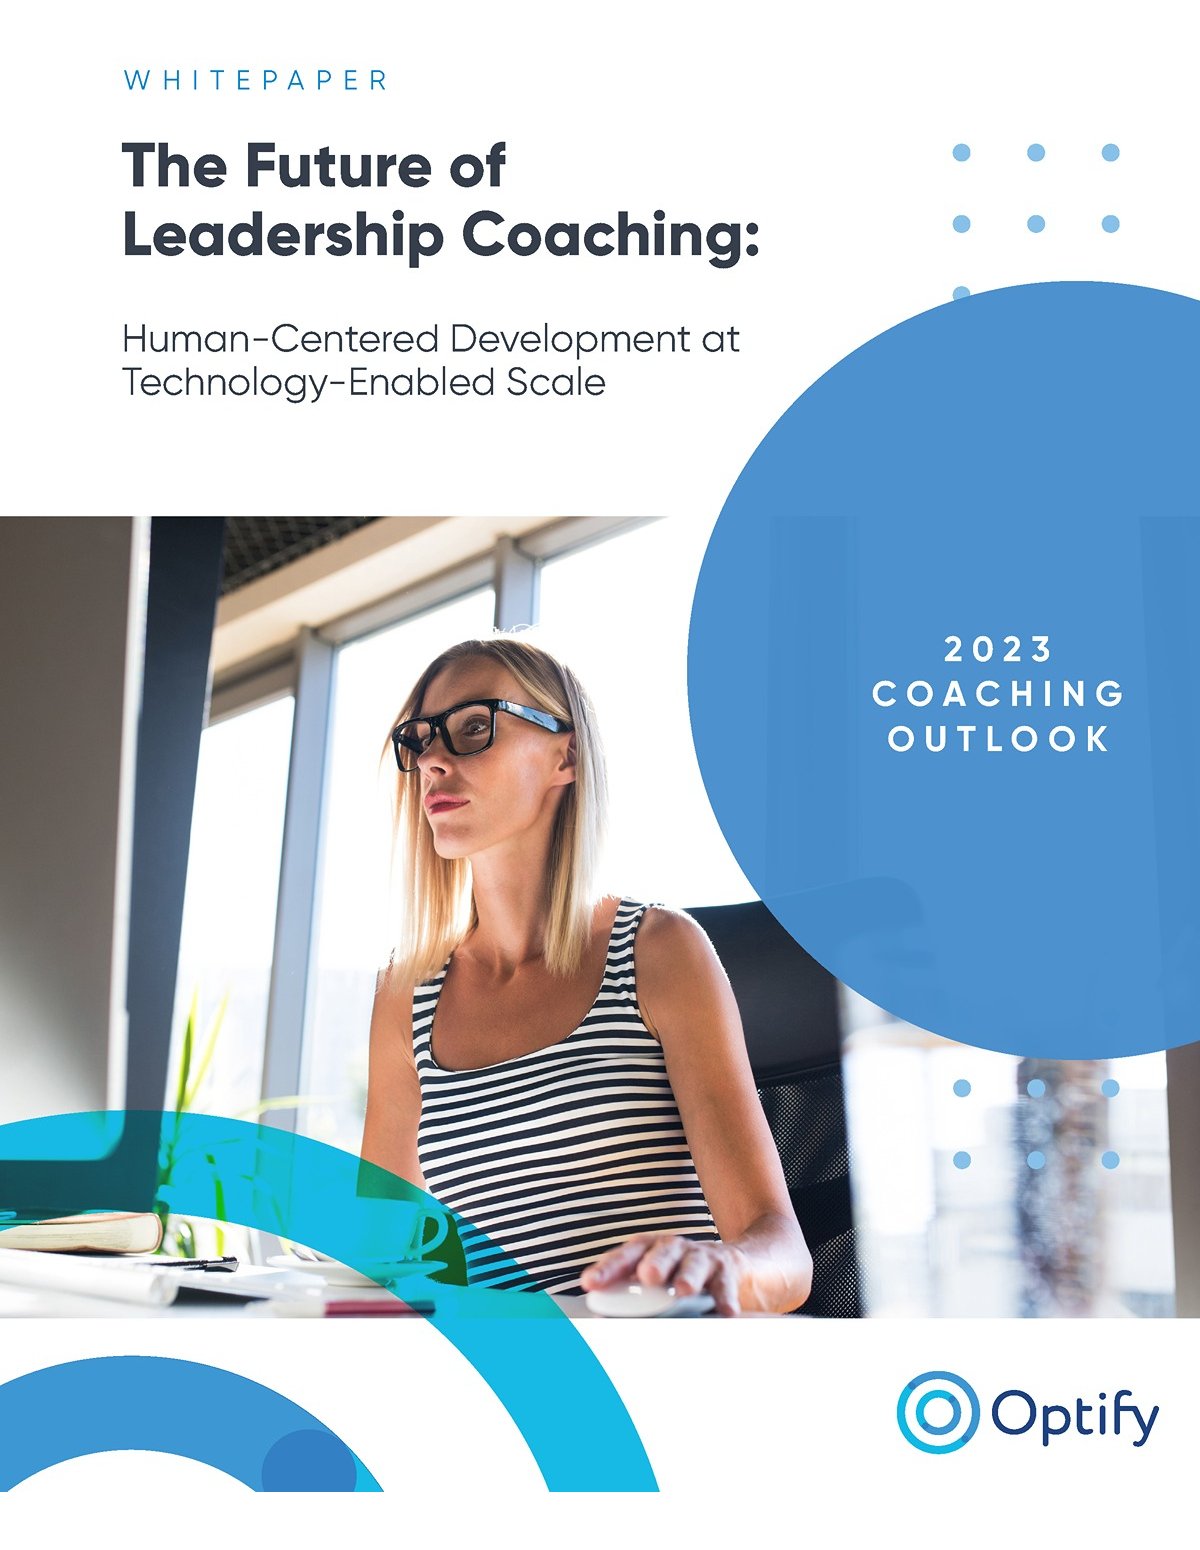 The The Future of Leadership Coaching: Human-Centered Development at Technology-Enabled Scale